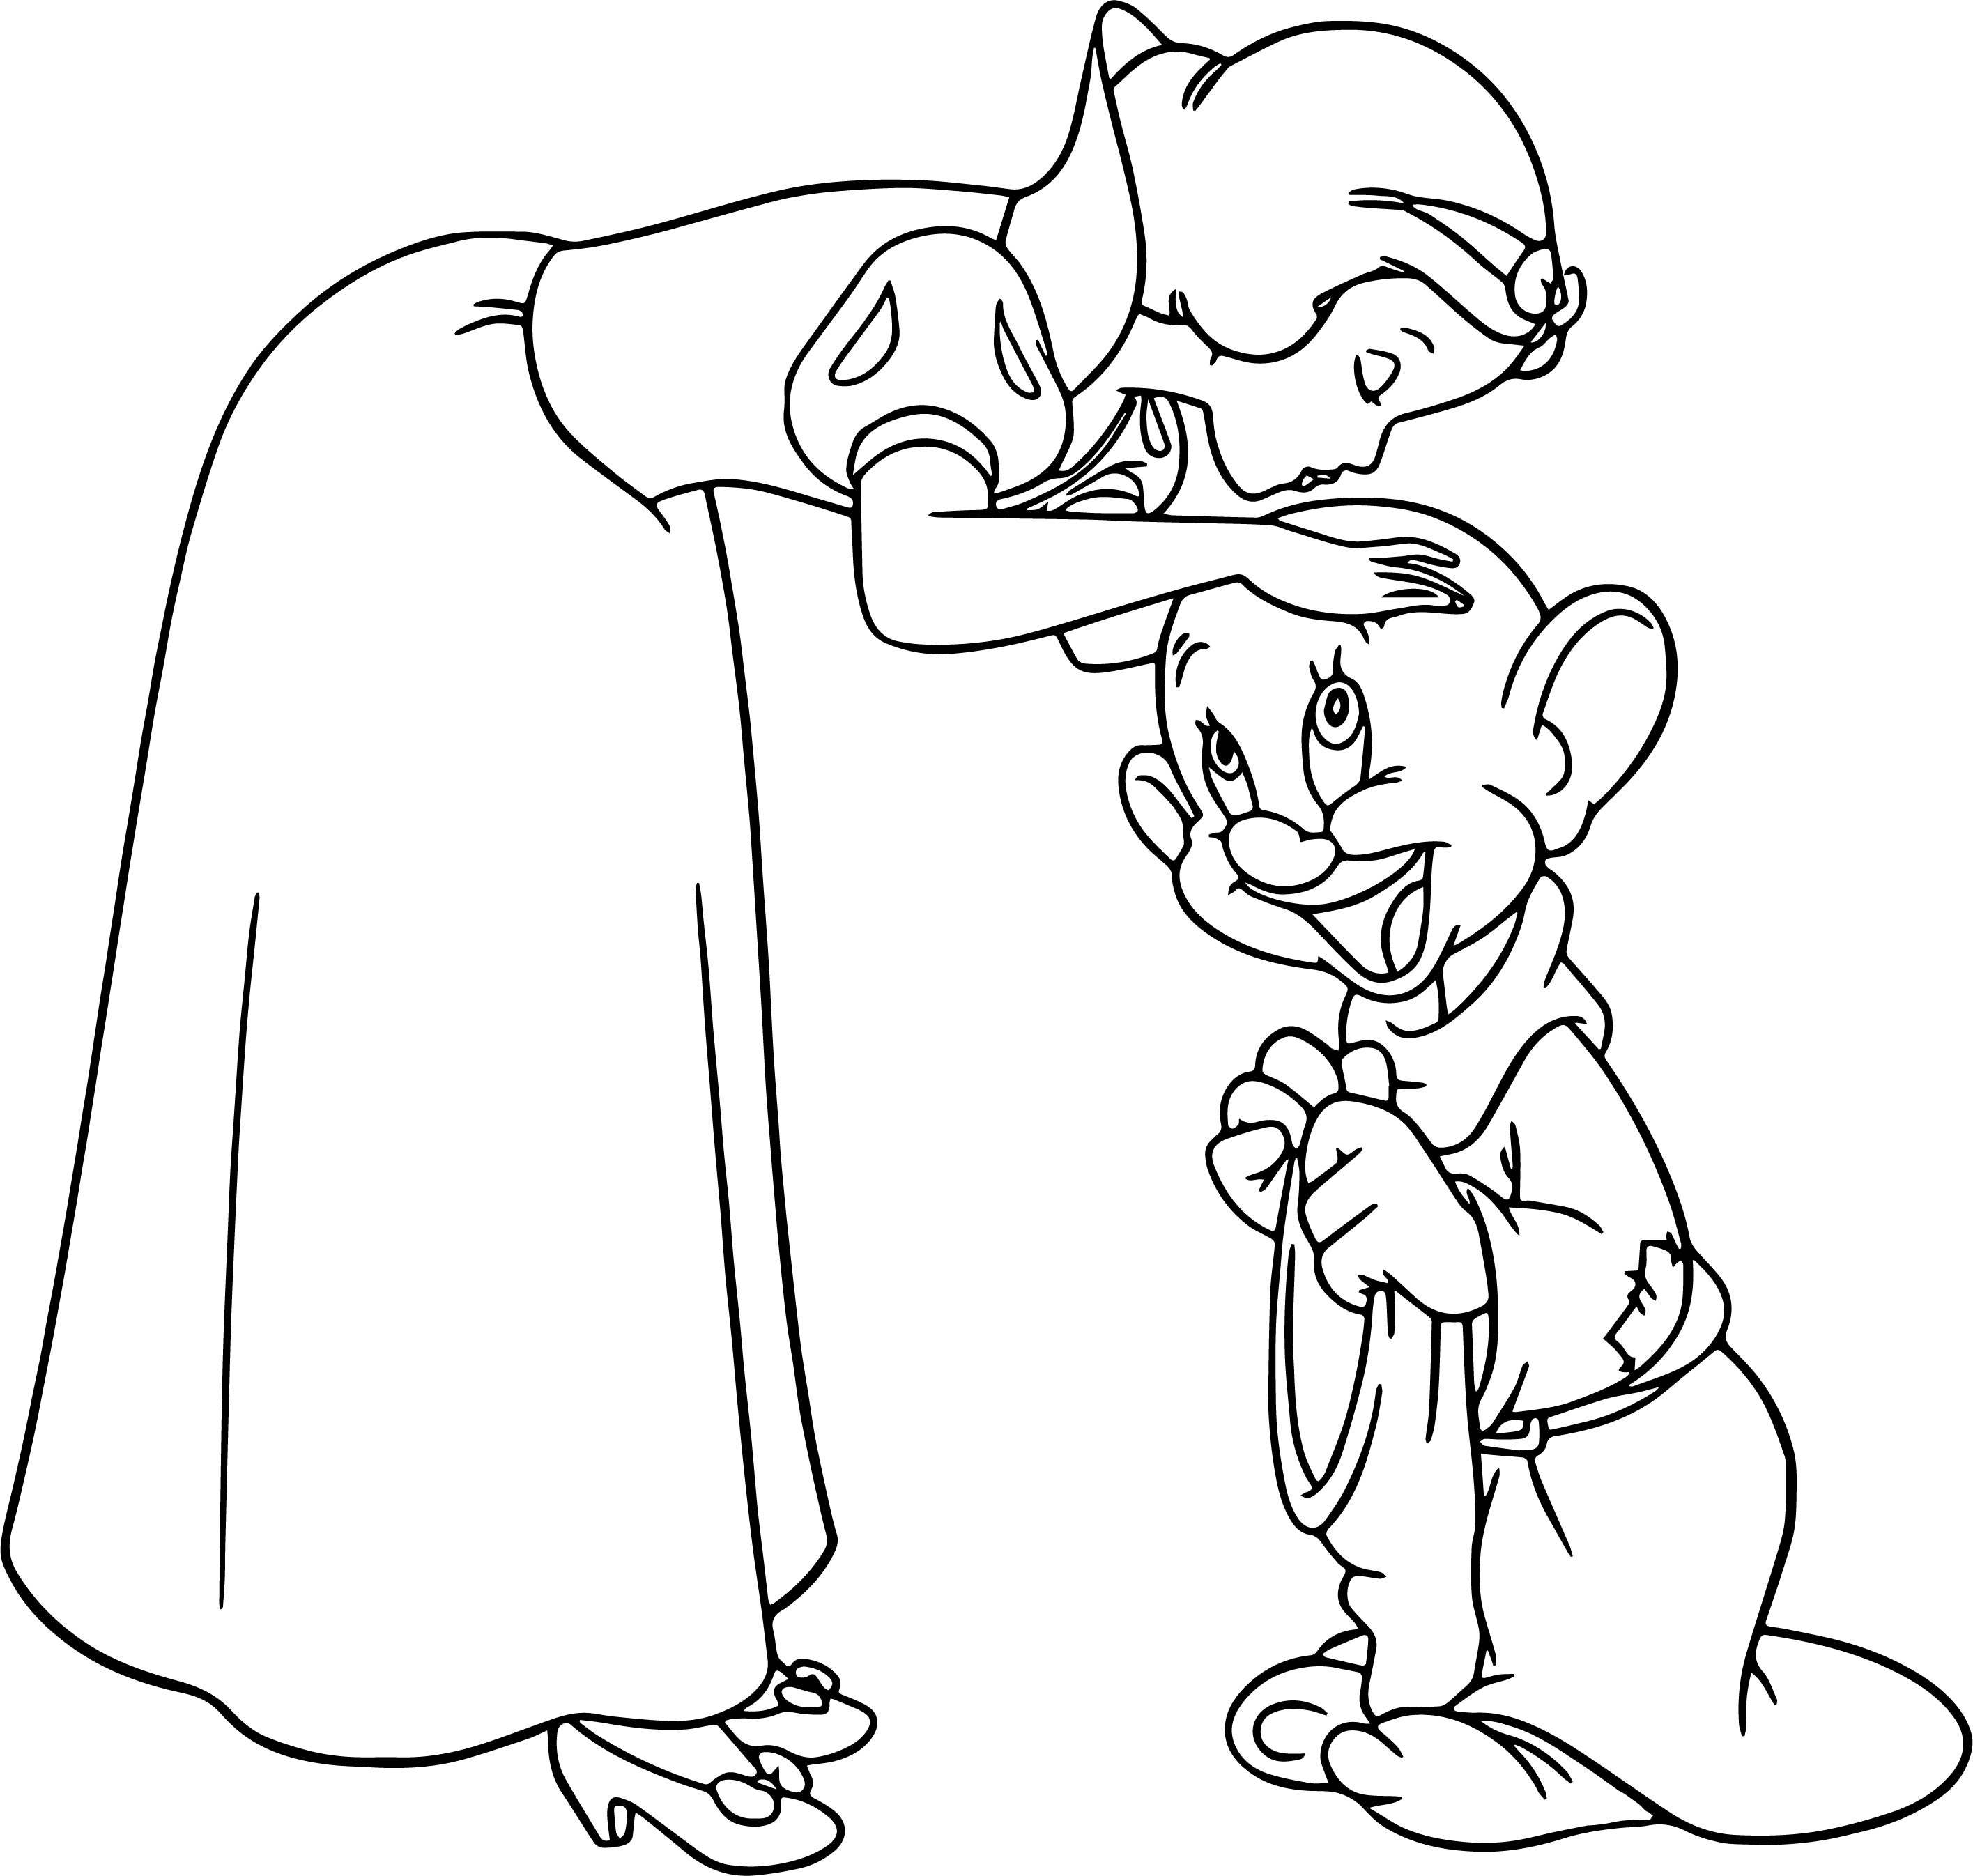 Snow White And The Seven Dwarfs Coloring Pages At Free Printable Colorings 